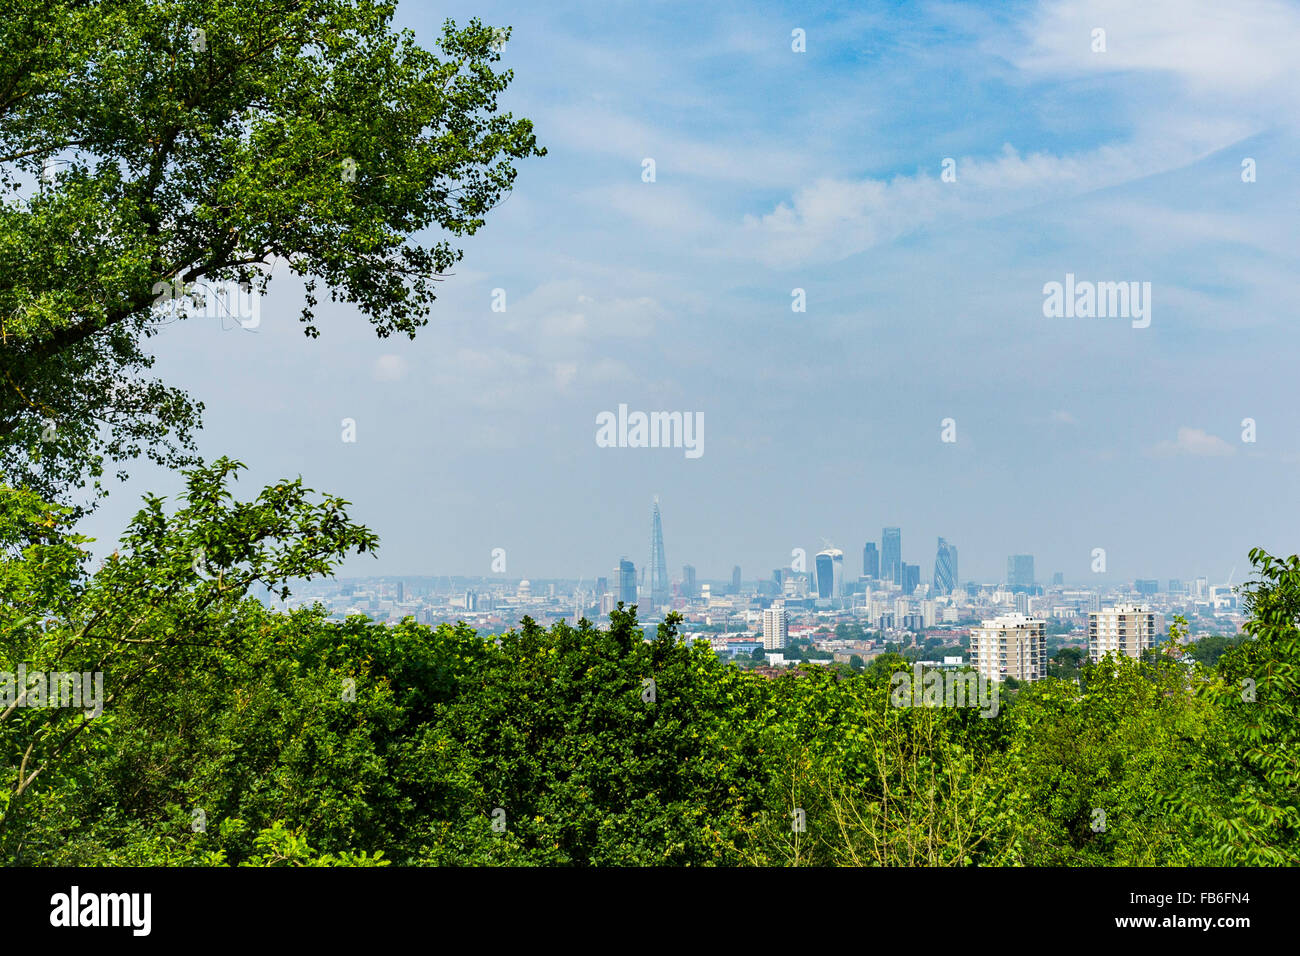 View of the City of London from Top of One Tree Hill, Honor Oak Park, London, England Stock Photo